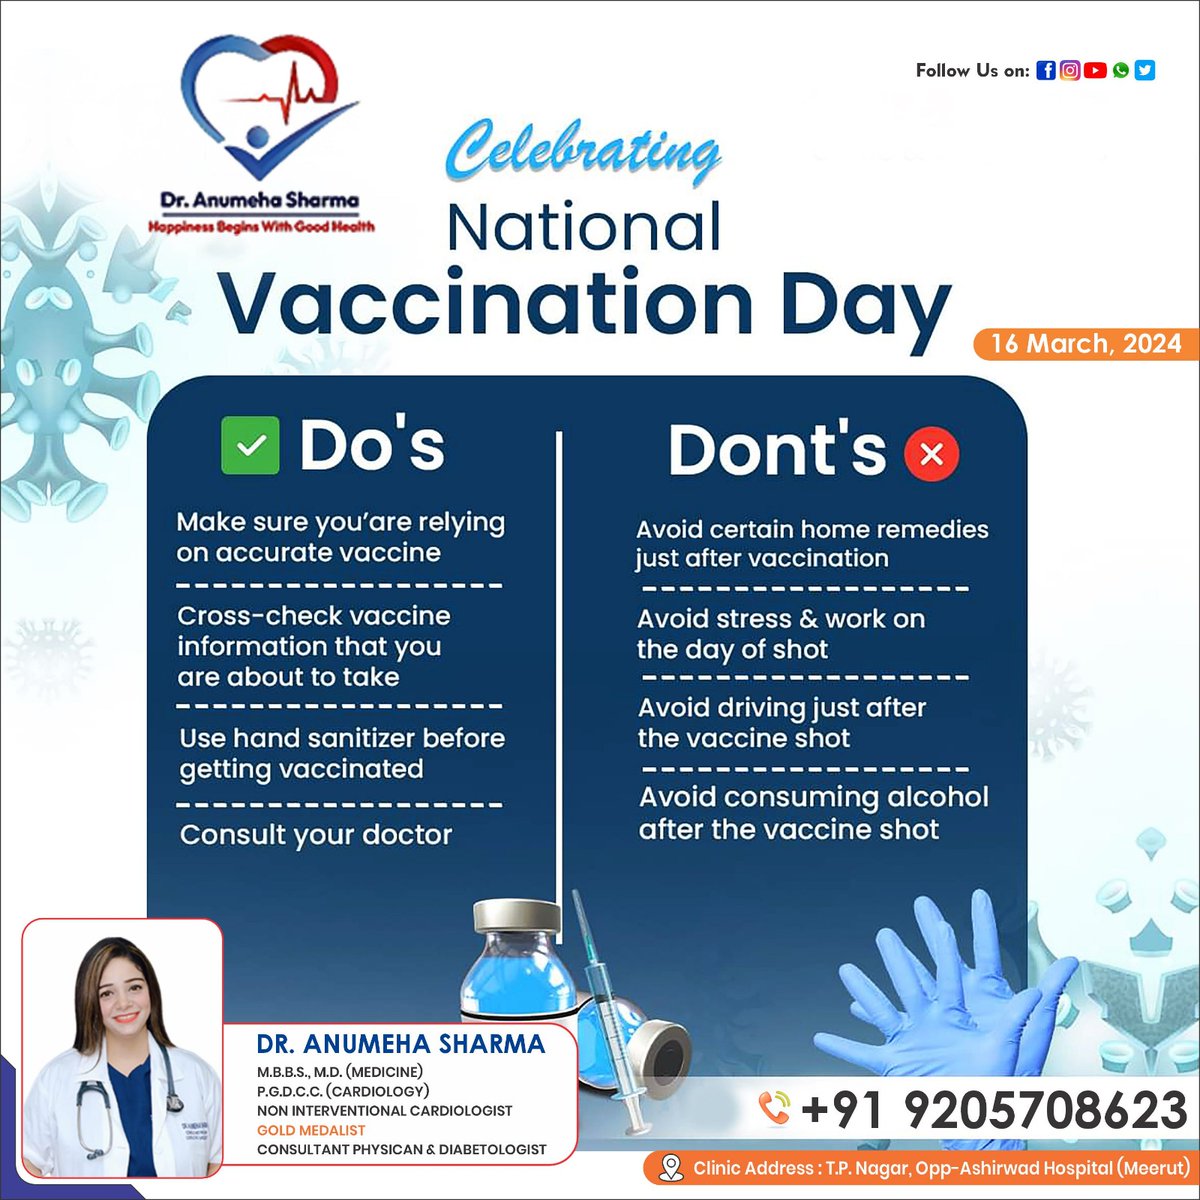 National Vaccination Day 💉 🧴 
also known as Immunization Day or Polio Ravivar, is an annual event celebrated in India on March 16th. 
.
.
.
 #nationalvaccinationday #vaccinationday #vaccination #provaccination #vaccinations #vaccinationtime #vaccines #nationalimmunizationday